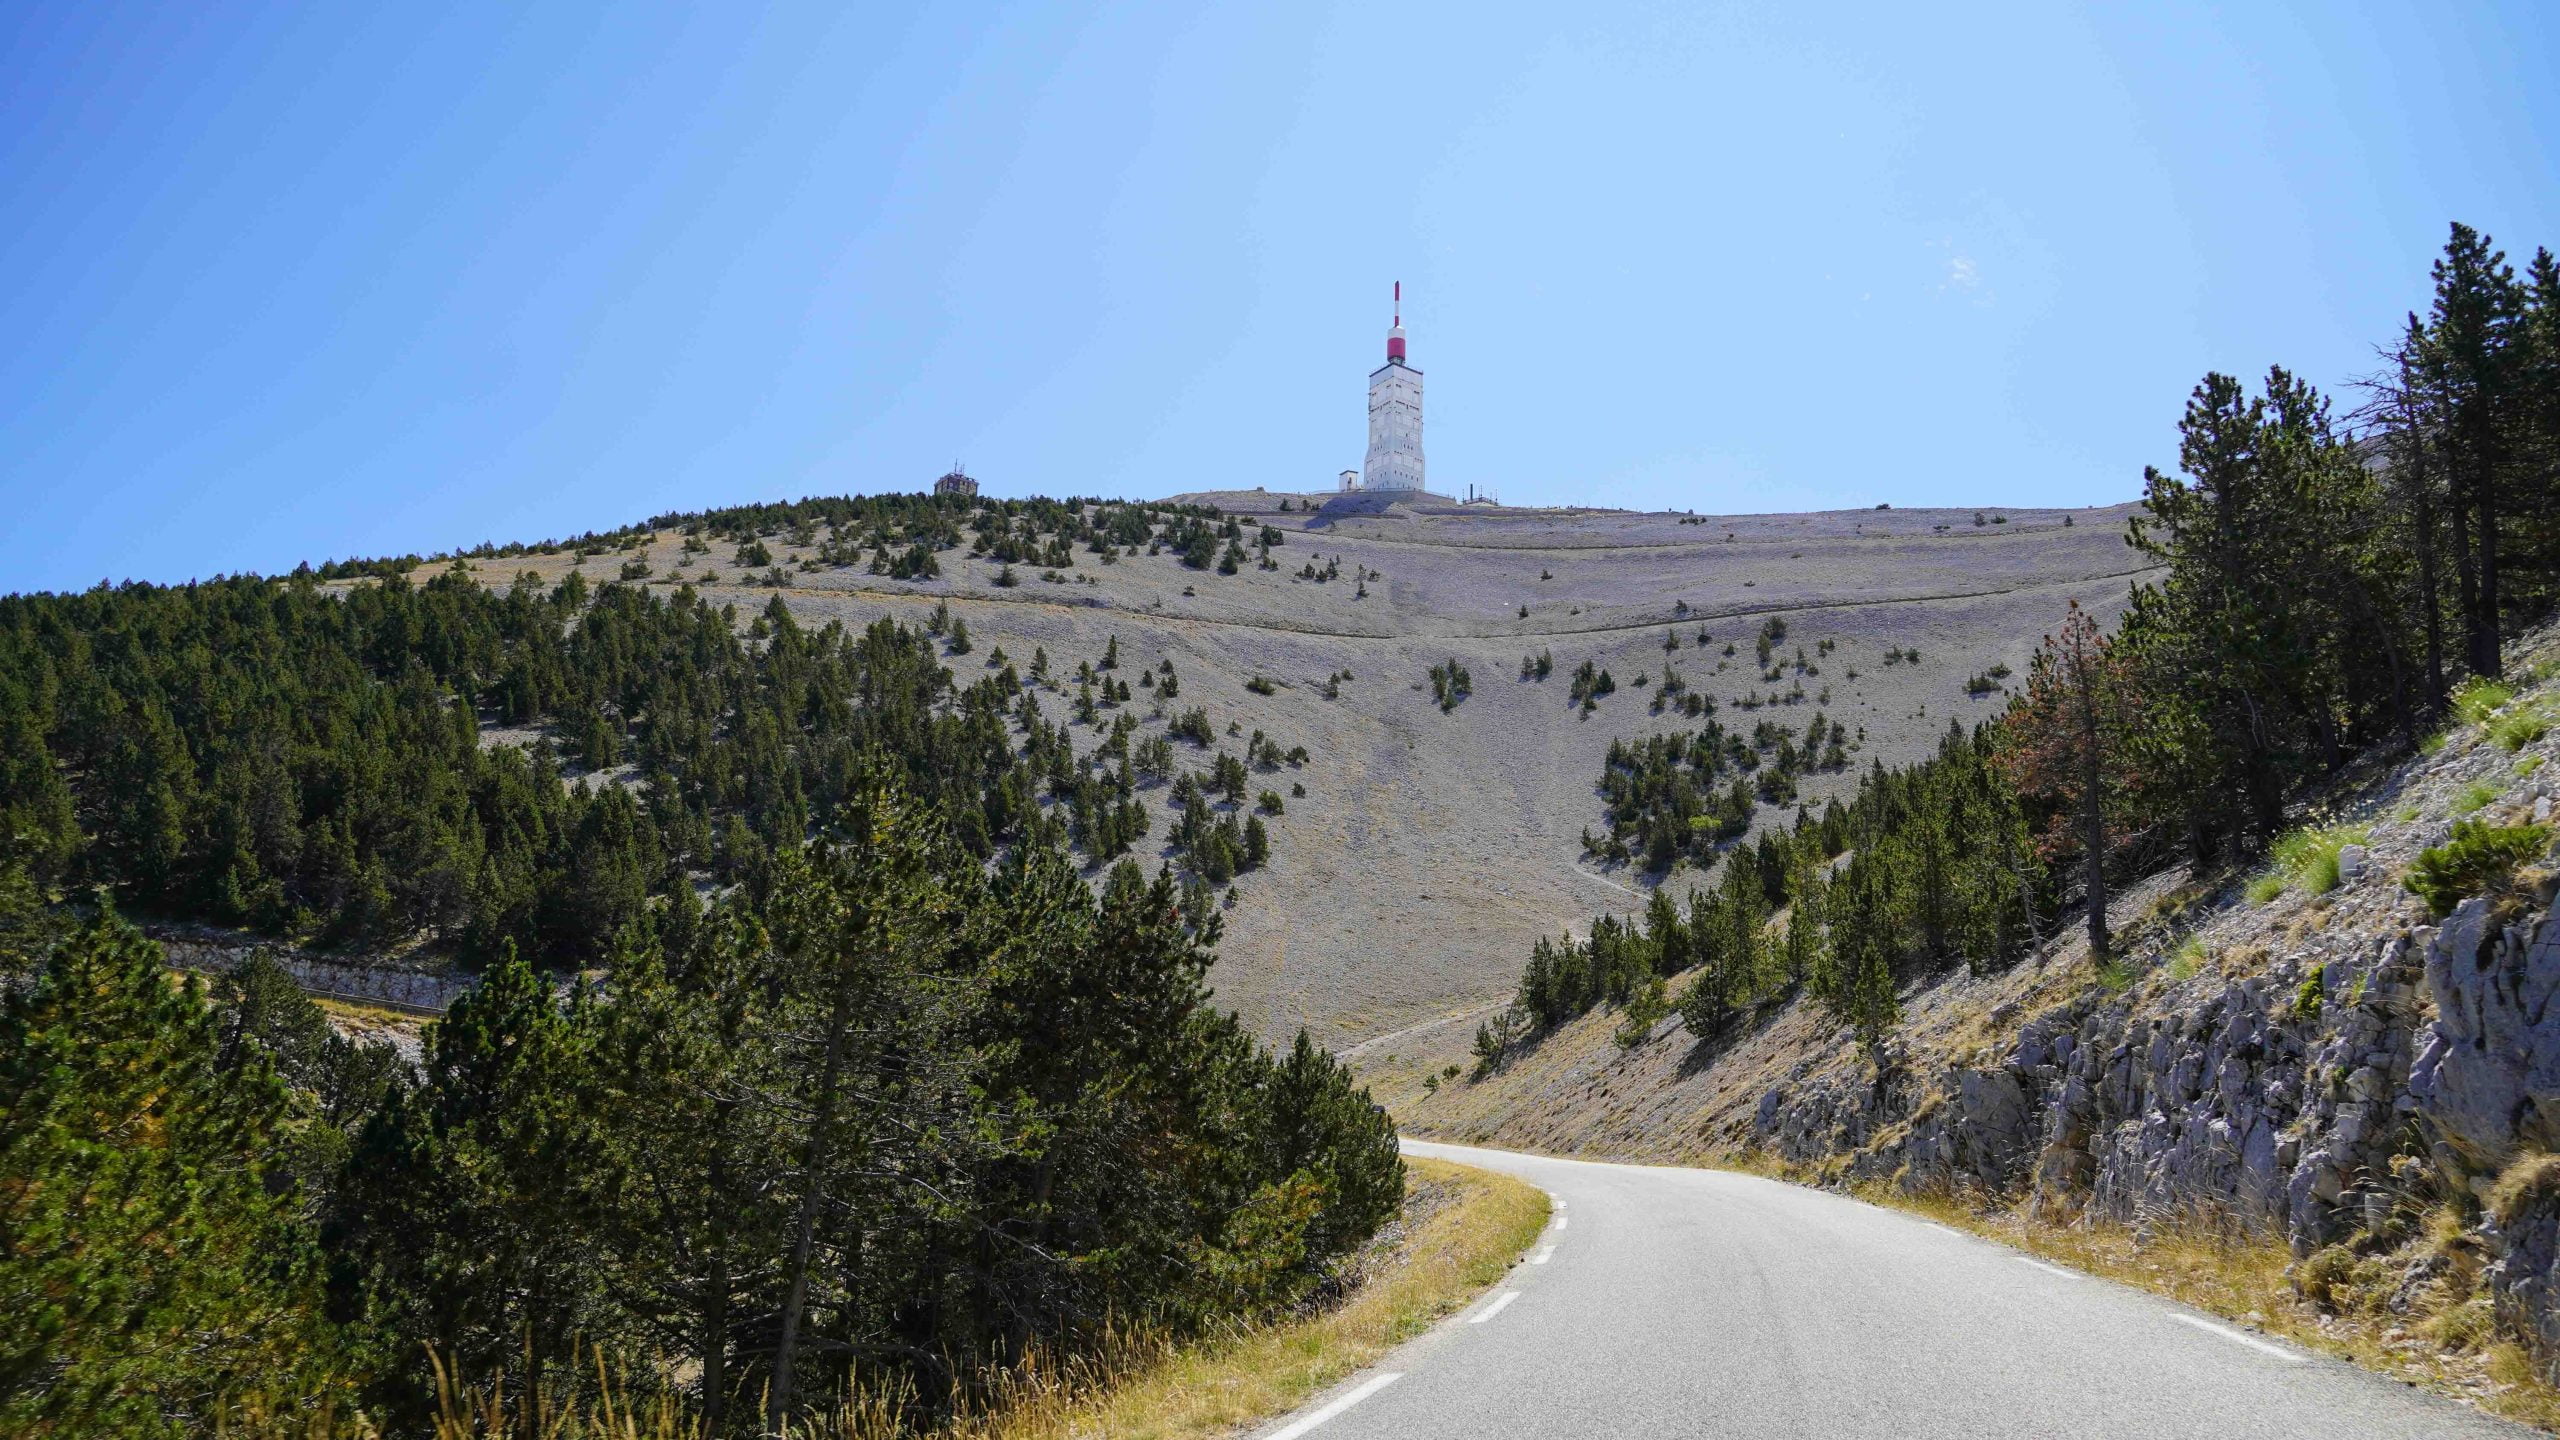 View to the summit of Ventoux from Malaucene side